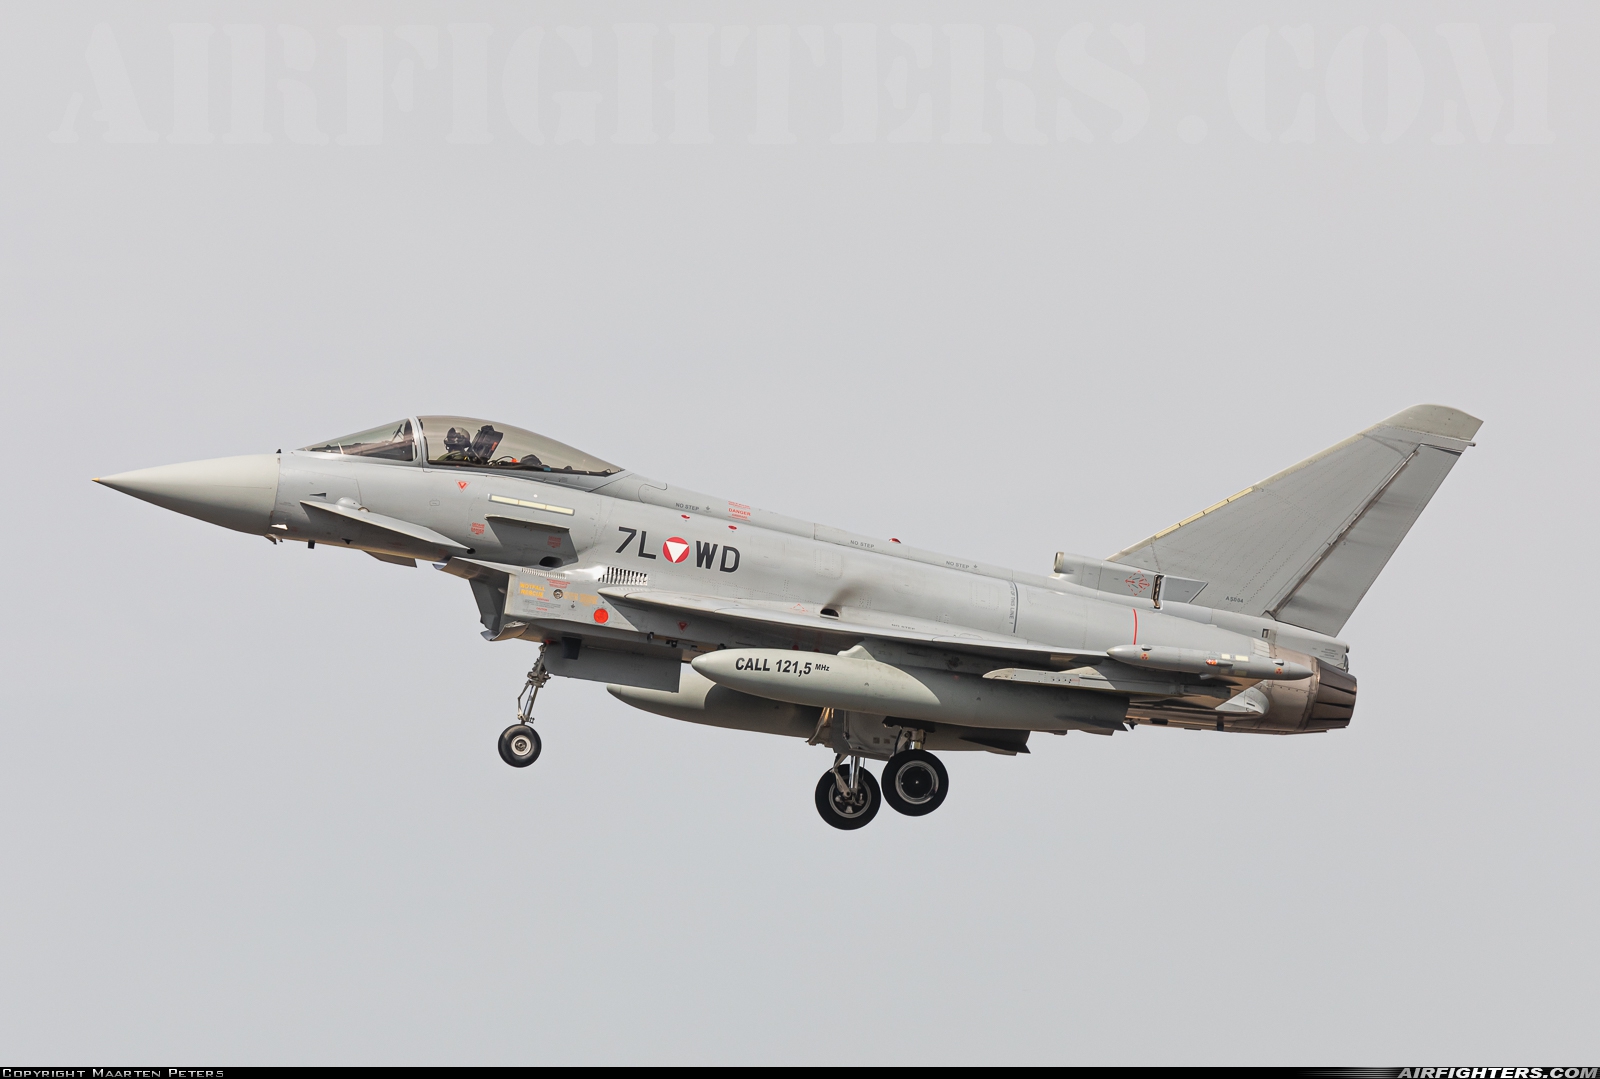 Austria - Air Force Eurofighter EF-2000 Typhoon S 7L-WD at Fairford (FFD / EGVA), UK